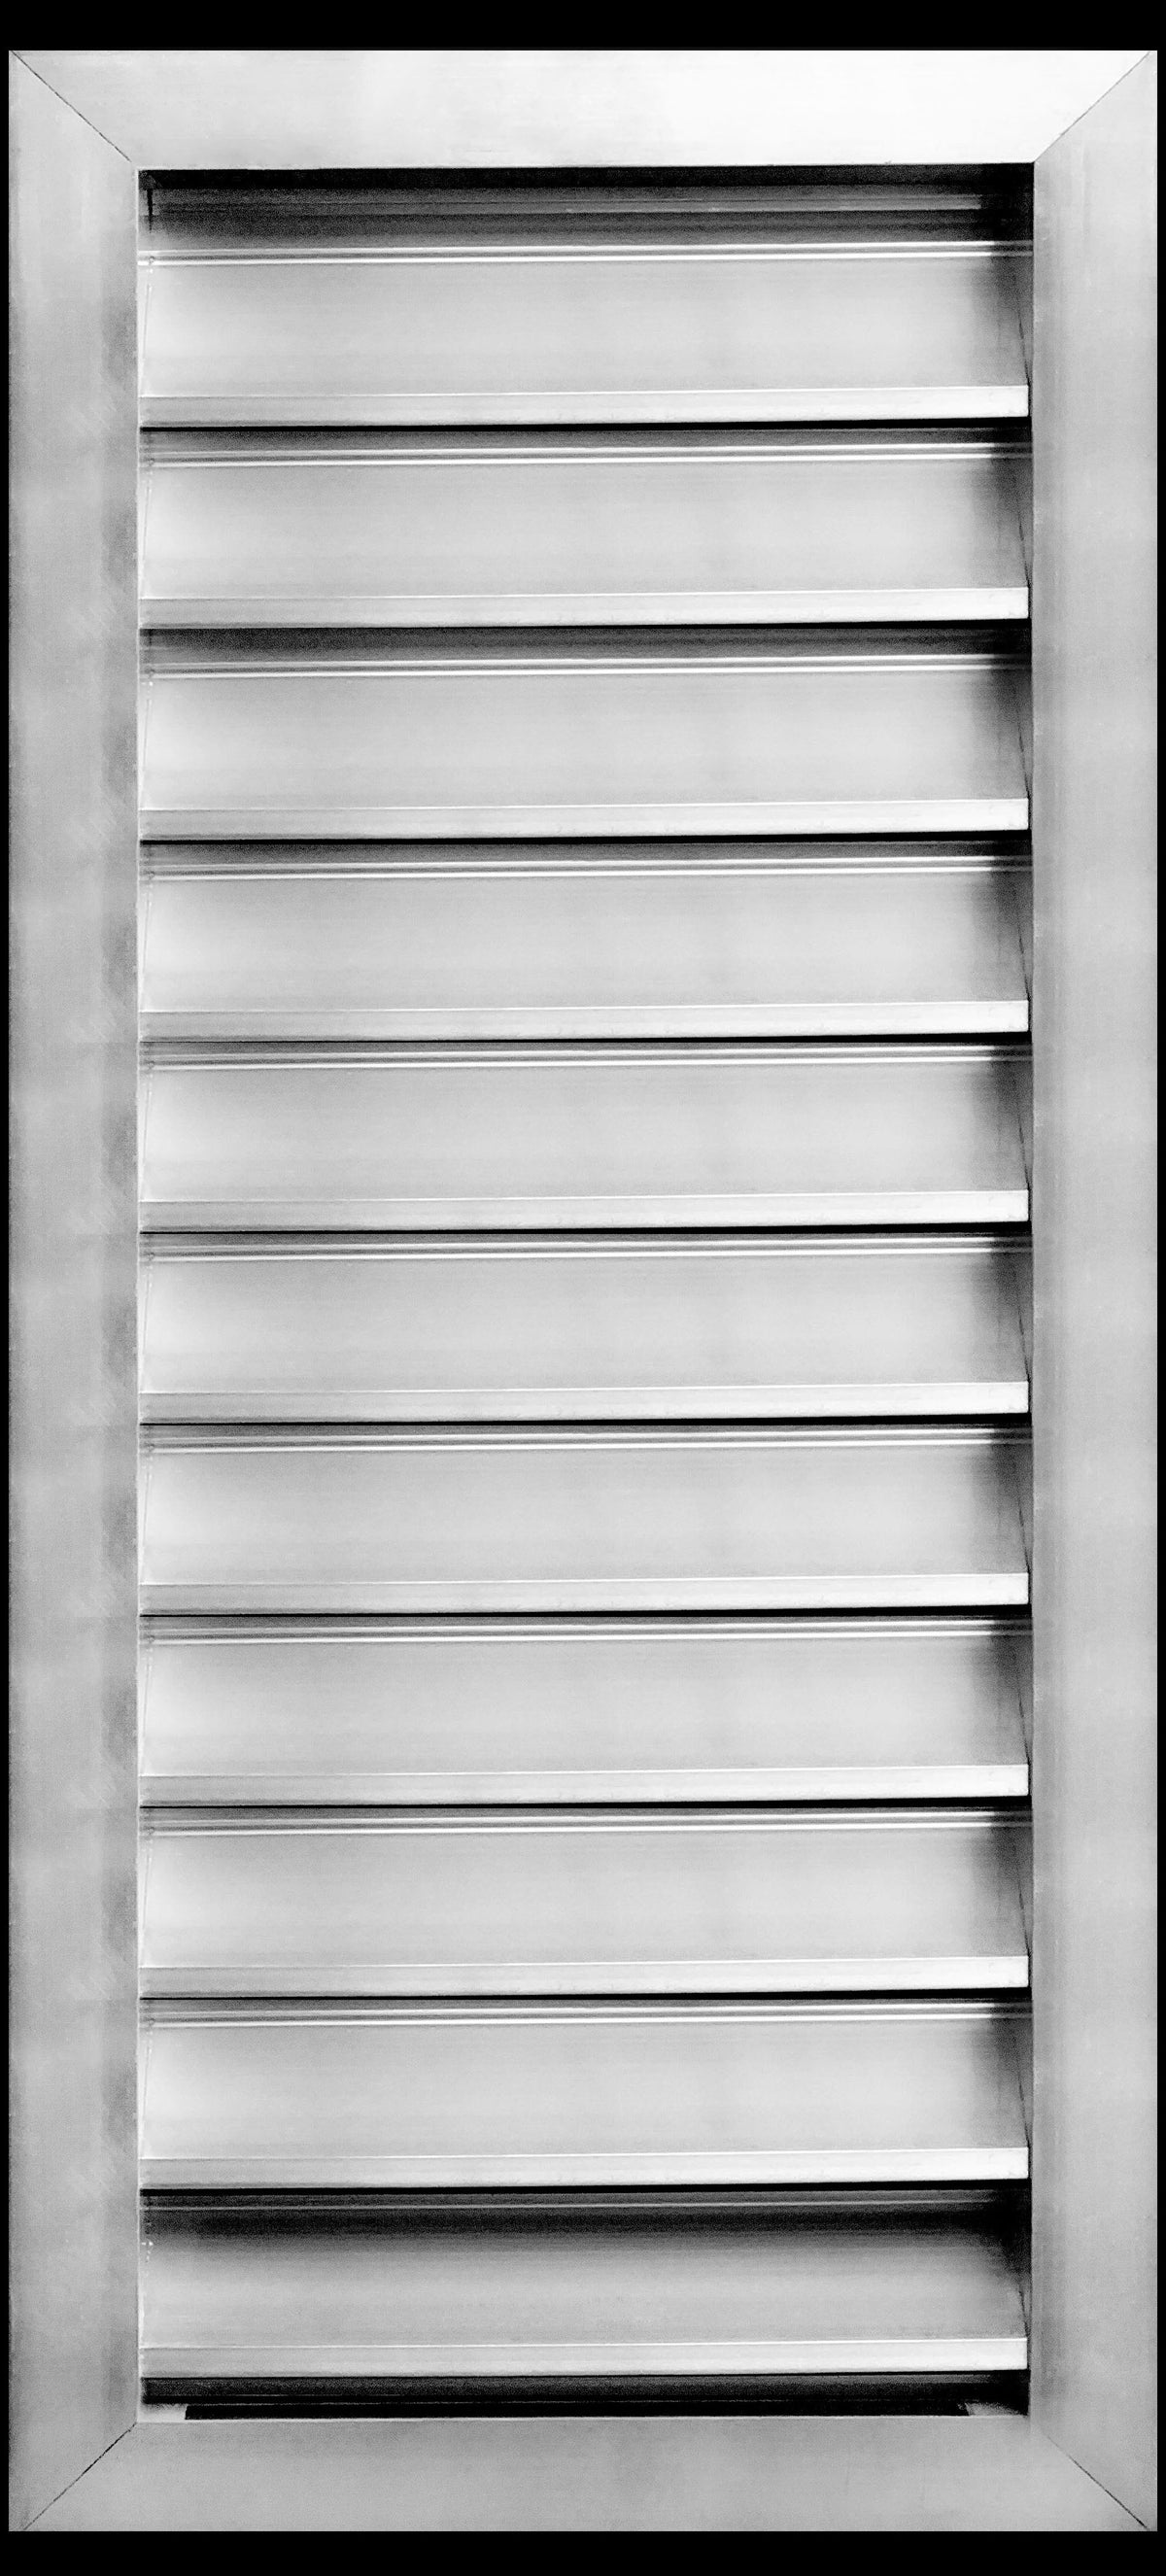 10&quot;w X 24&quot;h Aluminum Outdoor Weather Proof Louvers - Rain &amp; Waterproof Air Vent With Screen Mesh